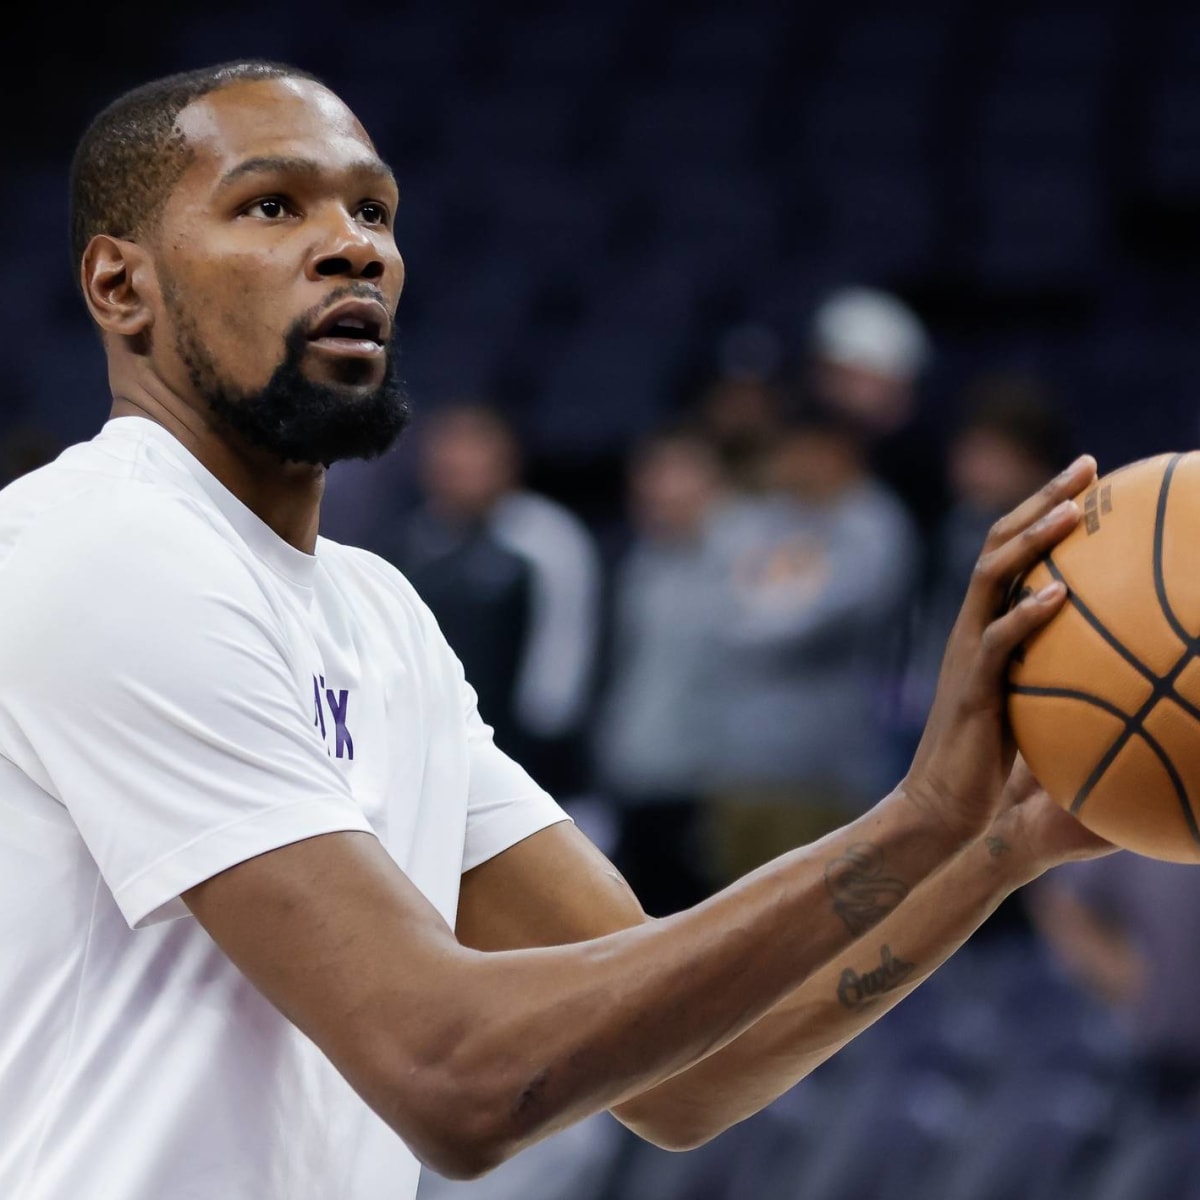 Watch: Kevin Durant Has A Witty Way Of Showing Frustration On Teammate As He…